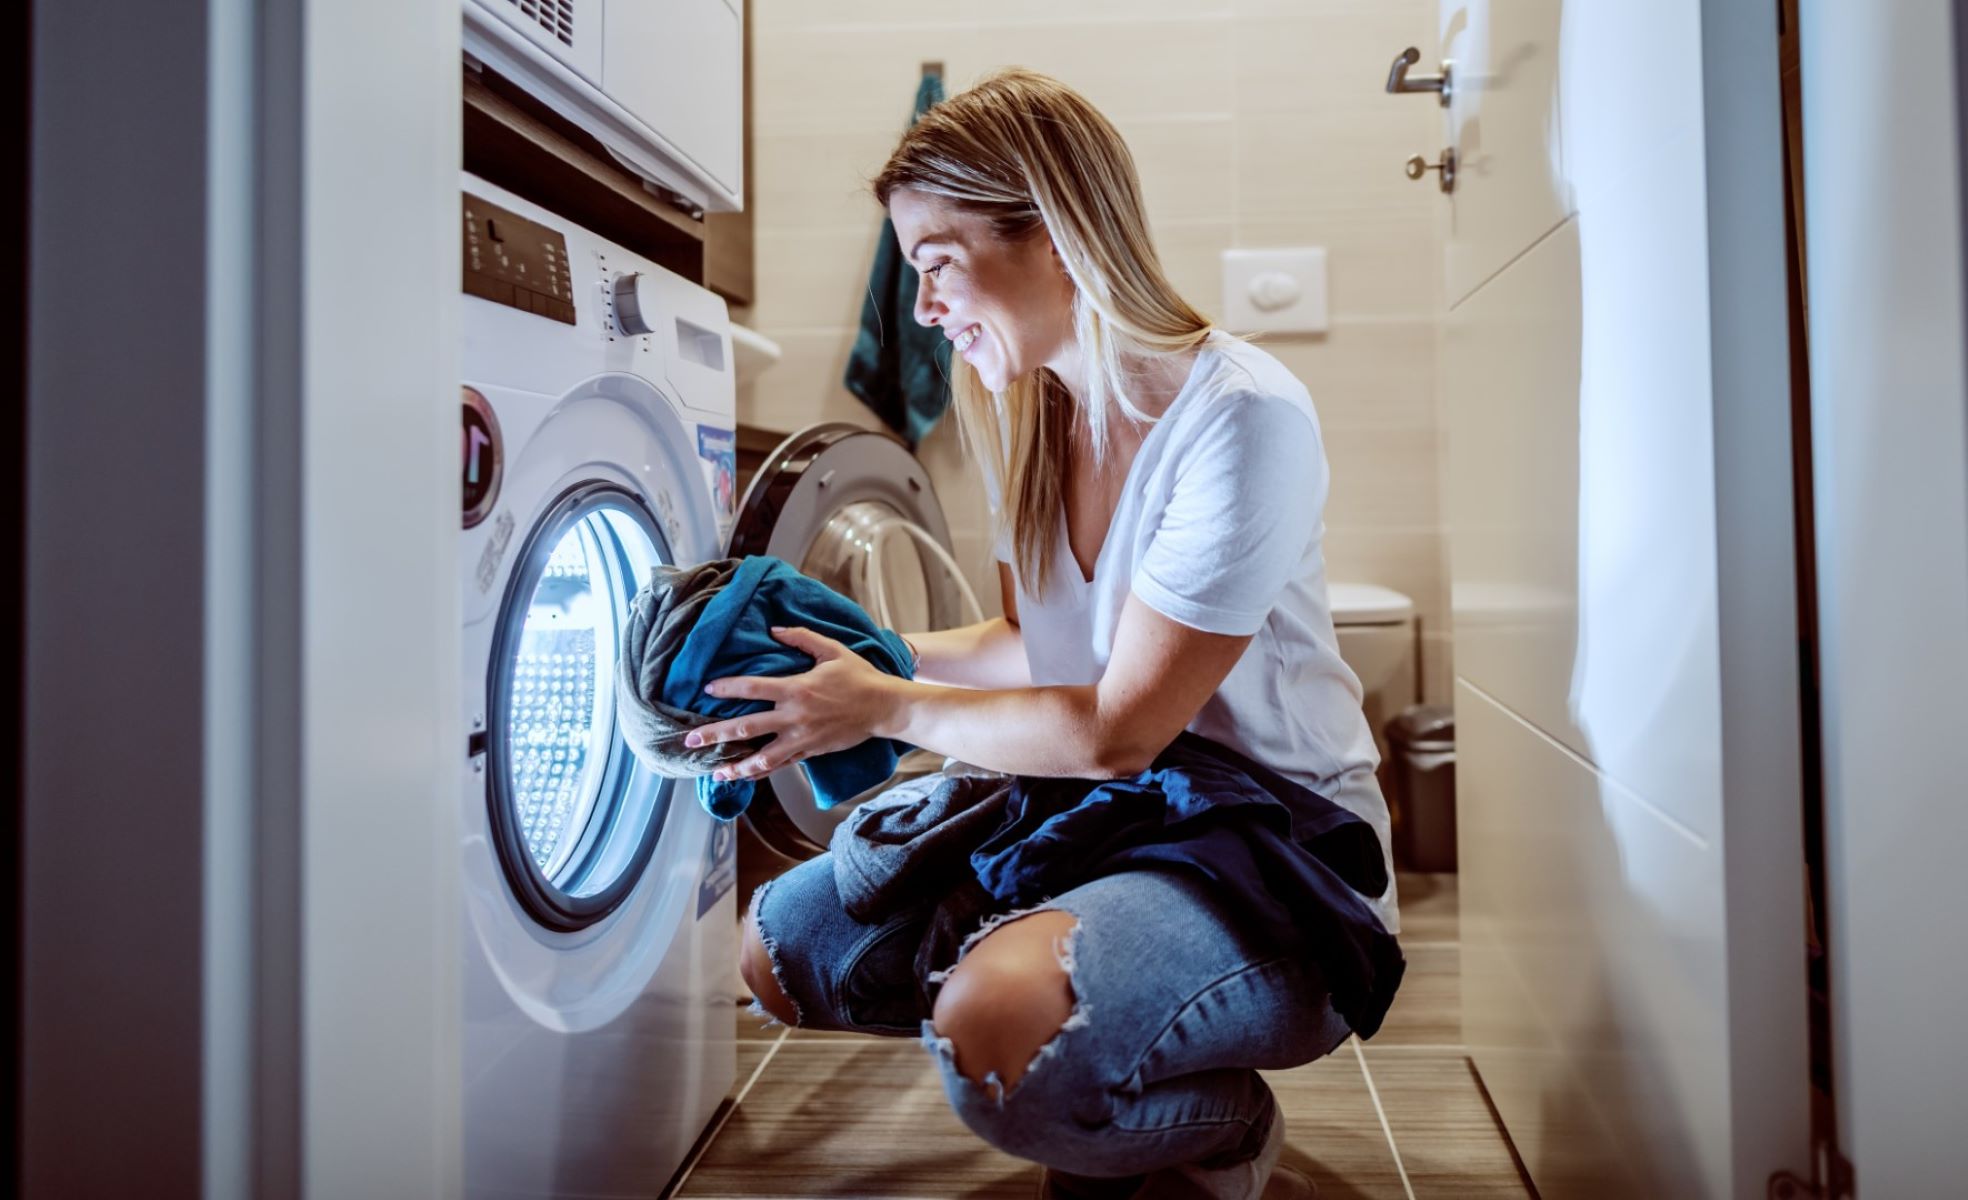 How To Turn Off Sound On An LG Washing Machine